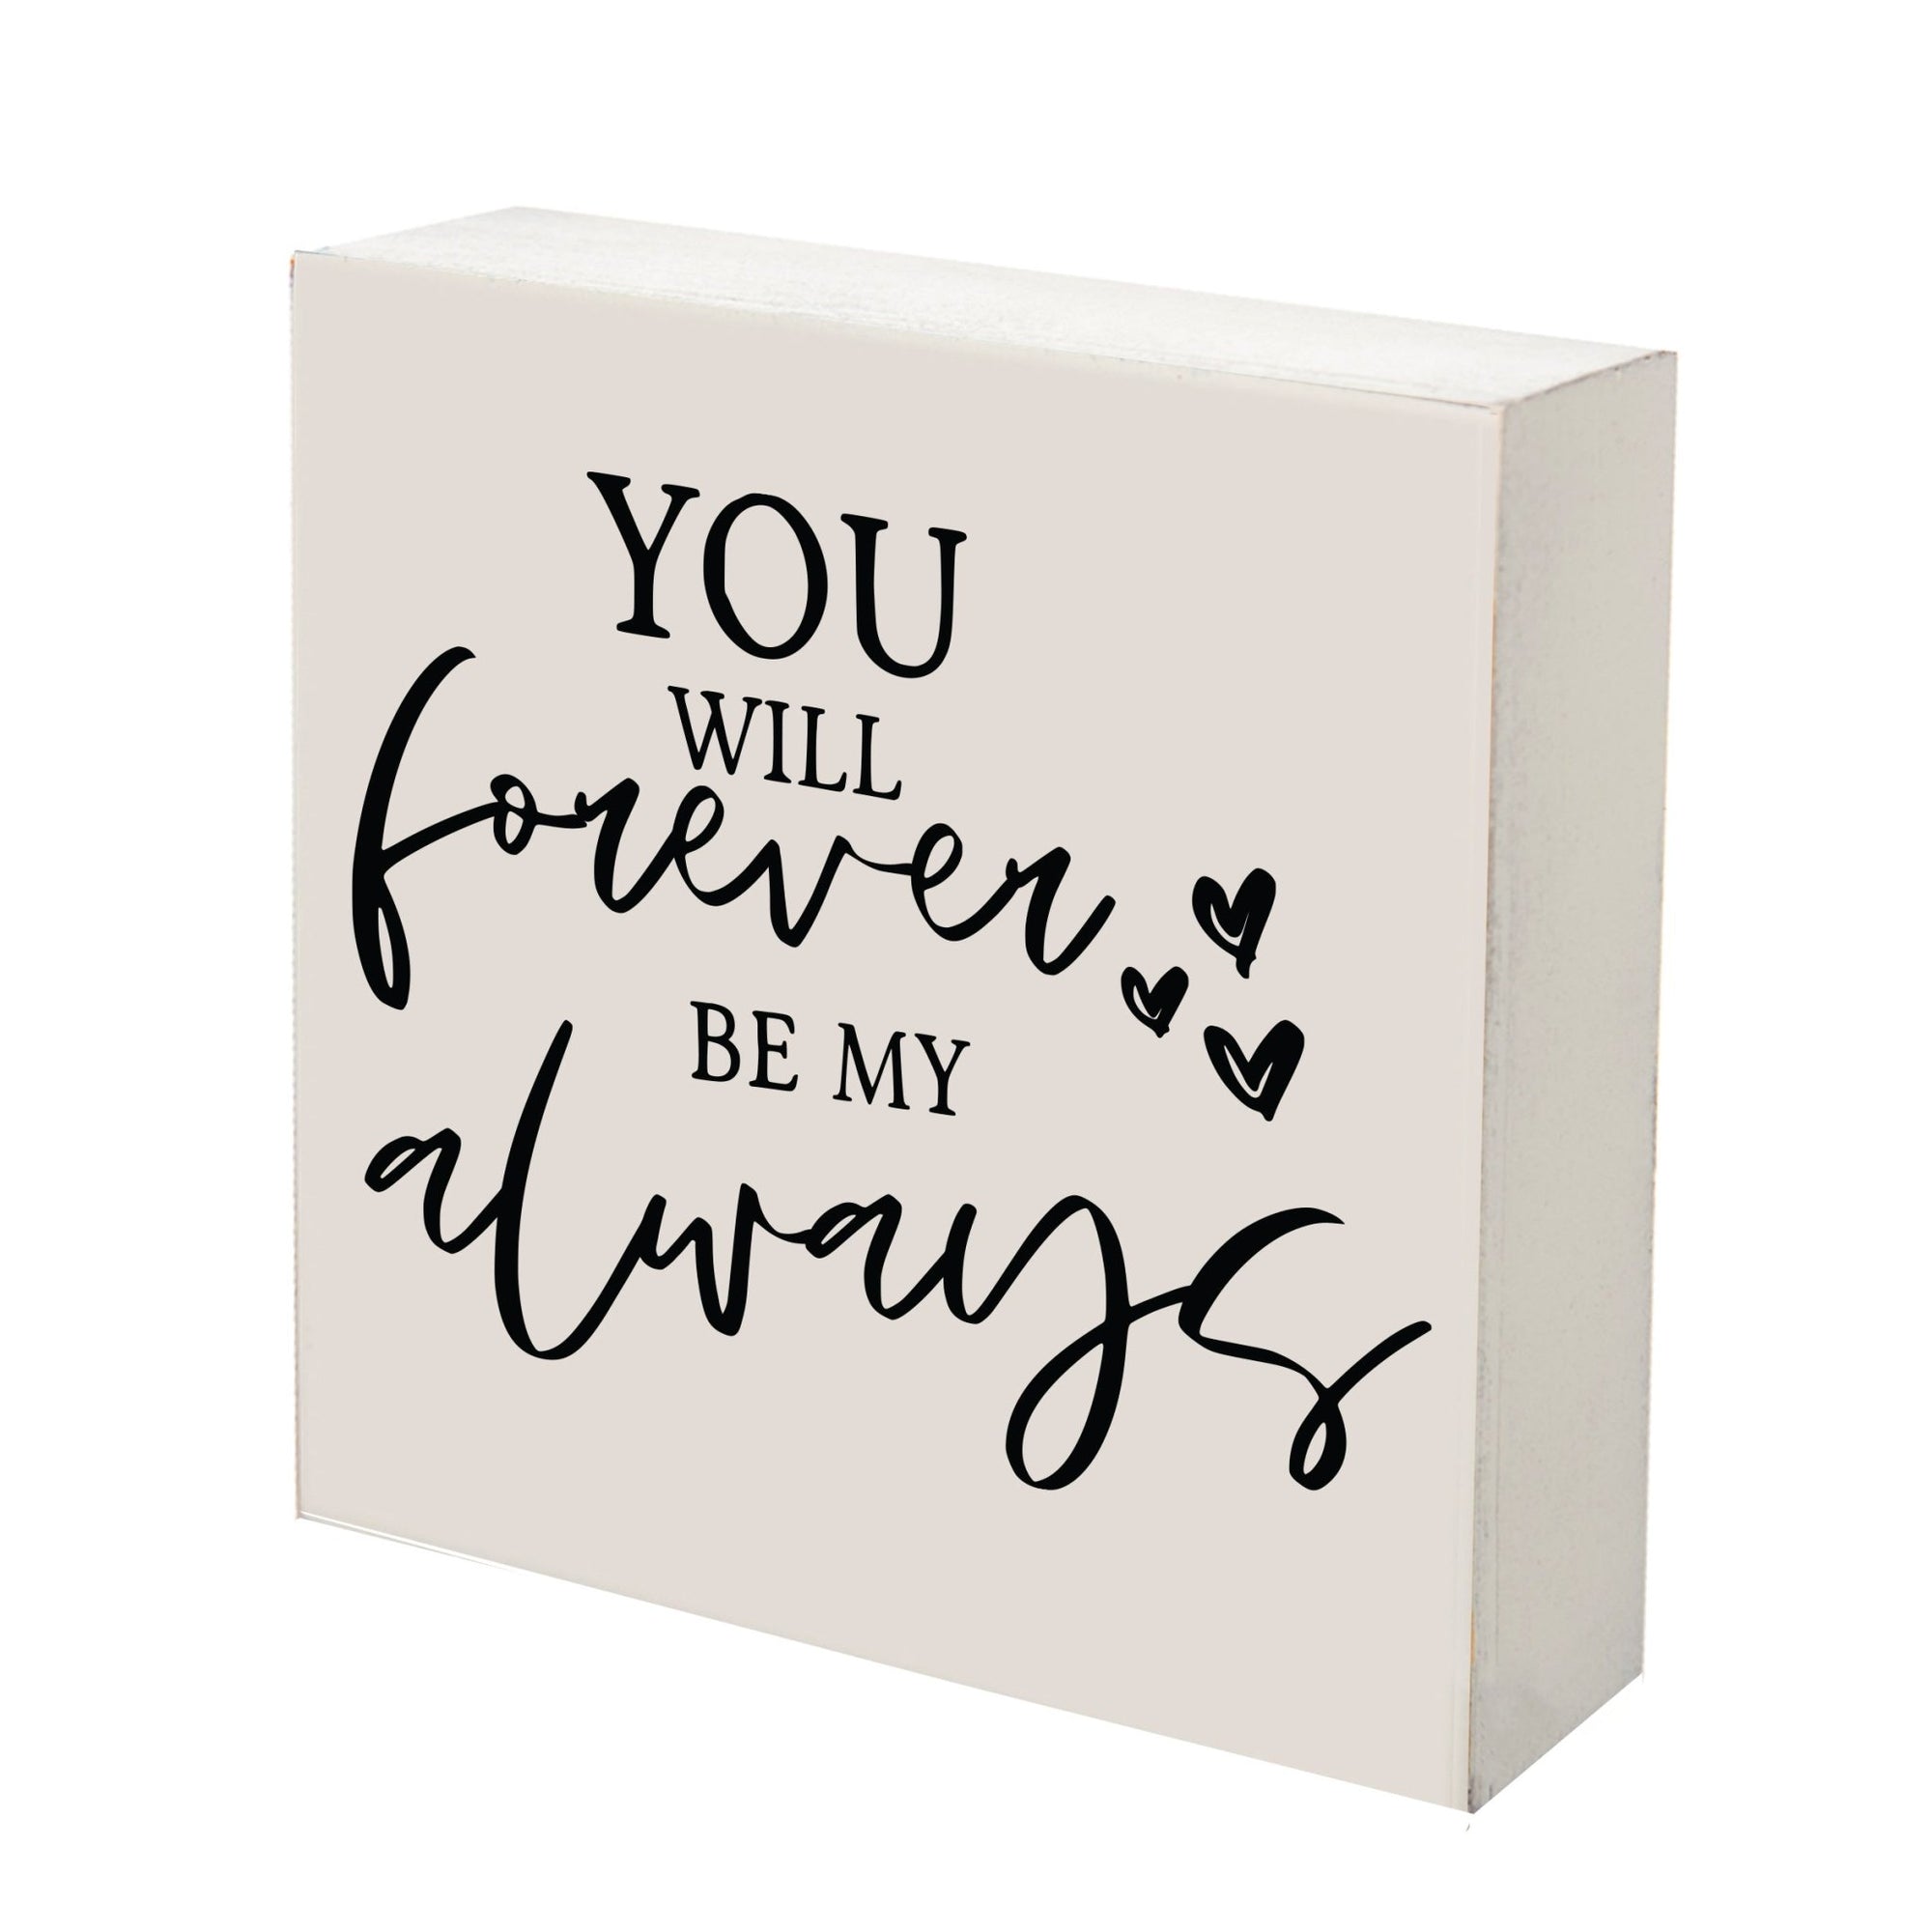 Modern Inspirational Shadow Box for Everyday Home Decorations 6x6 - You Will Forever - LifeSong Milestones